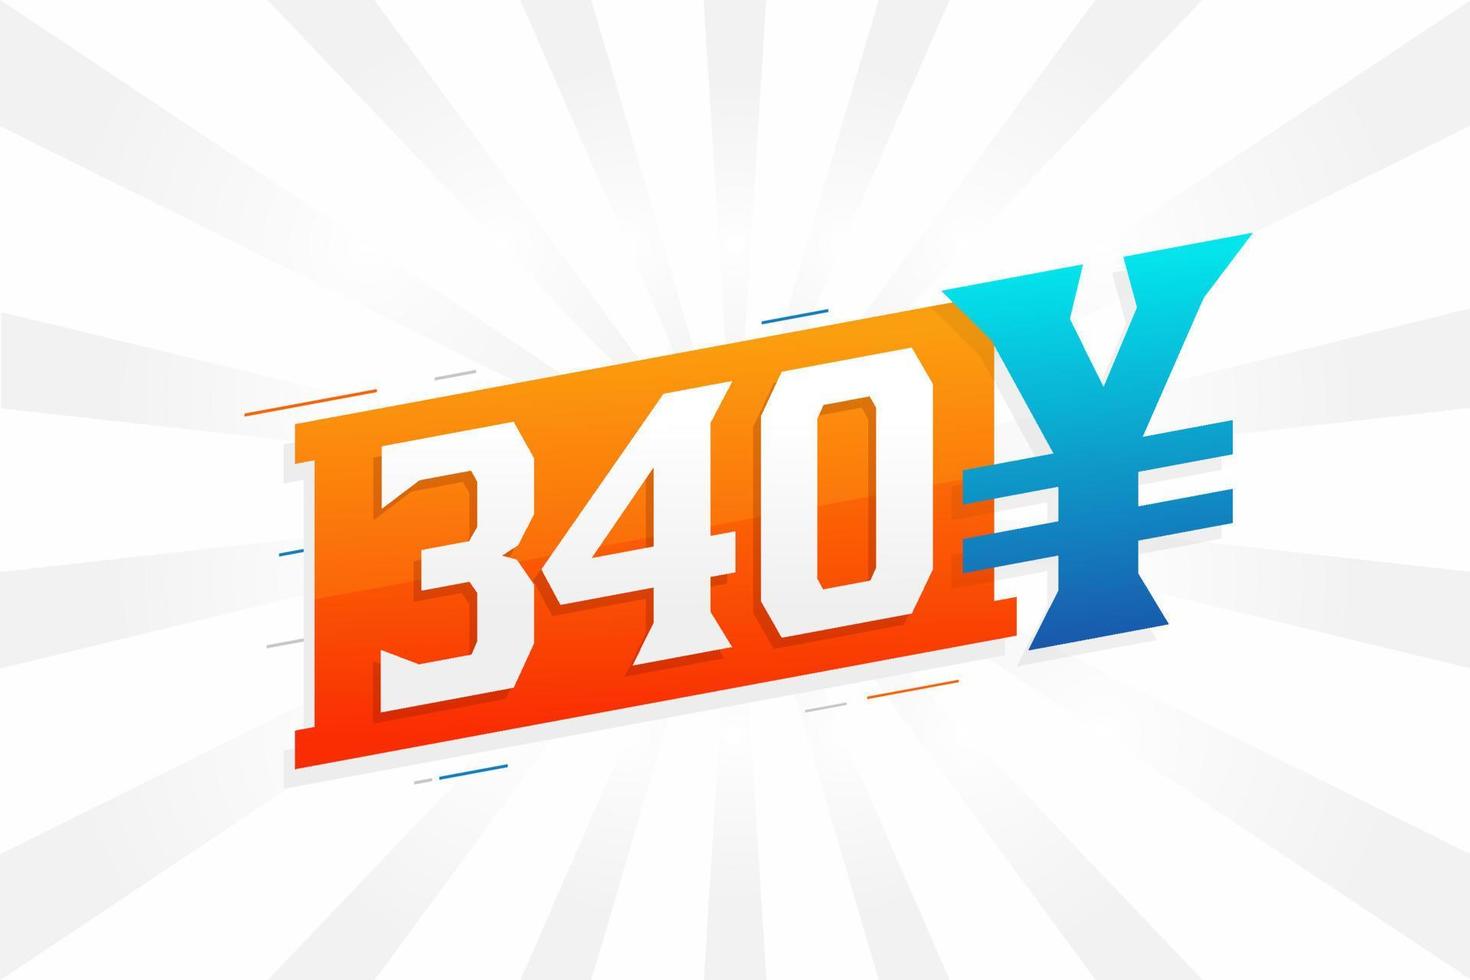 340 Yuan Chinese currency vector text symbol. 340 Yen Japanese currency Money stock vector